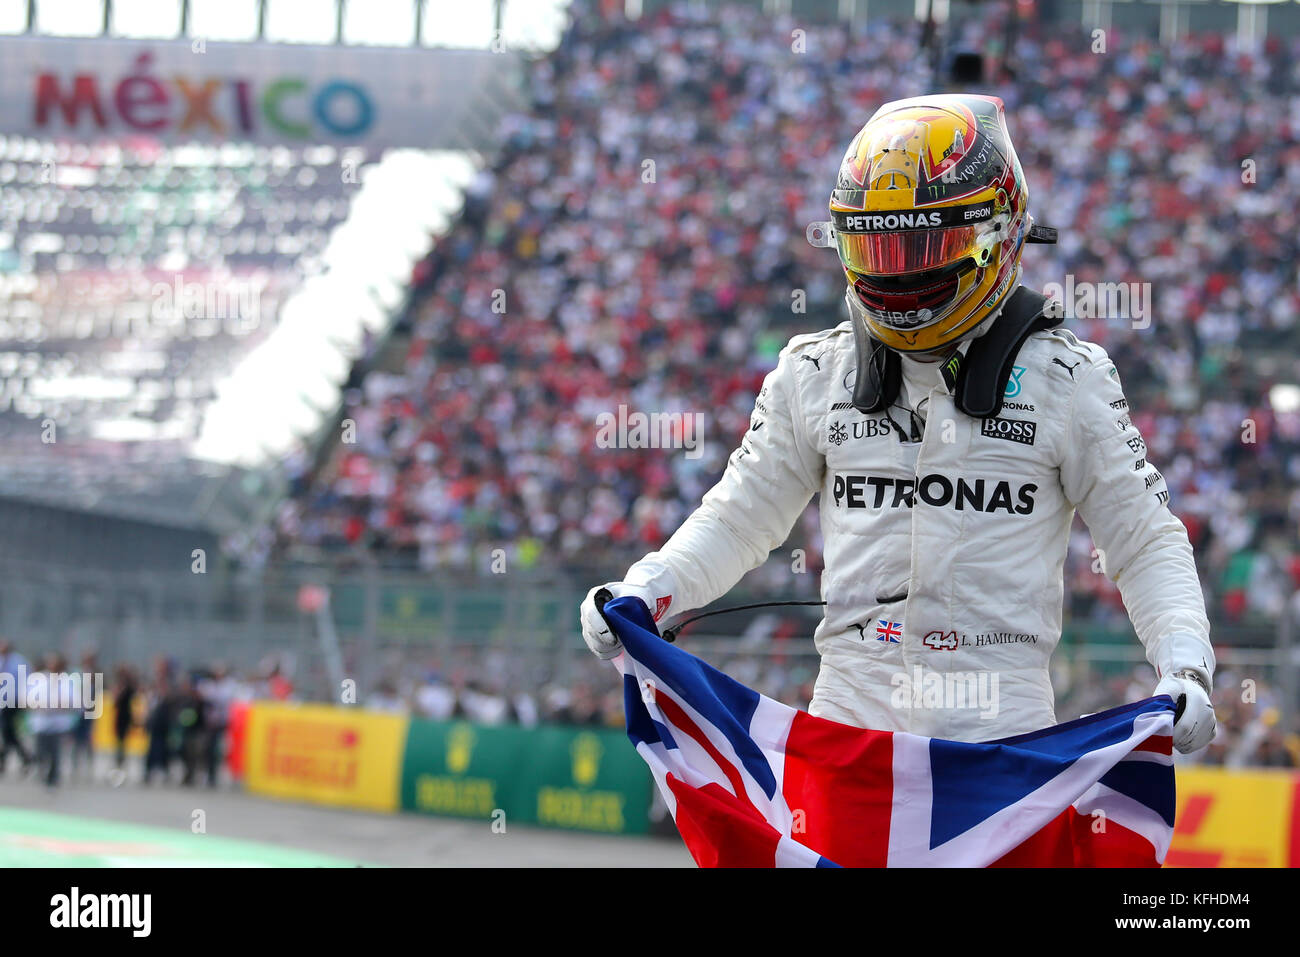 Mercedes' Lewis Hamilton celebrates winning the Formula One drivers' championship during the Mexican Grand Prix at the Autodromo Hermanos Rodriguez, Mexico City. Stock Photo